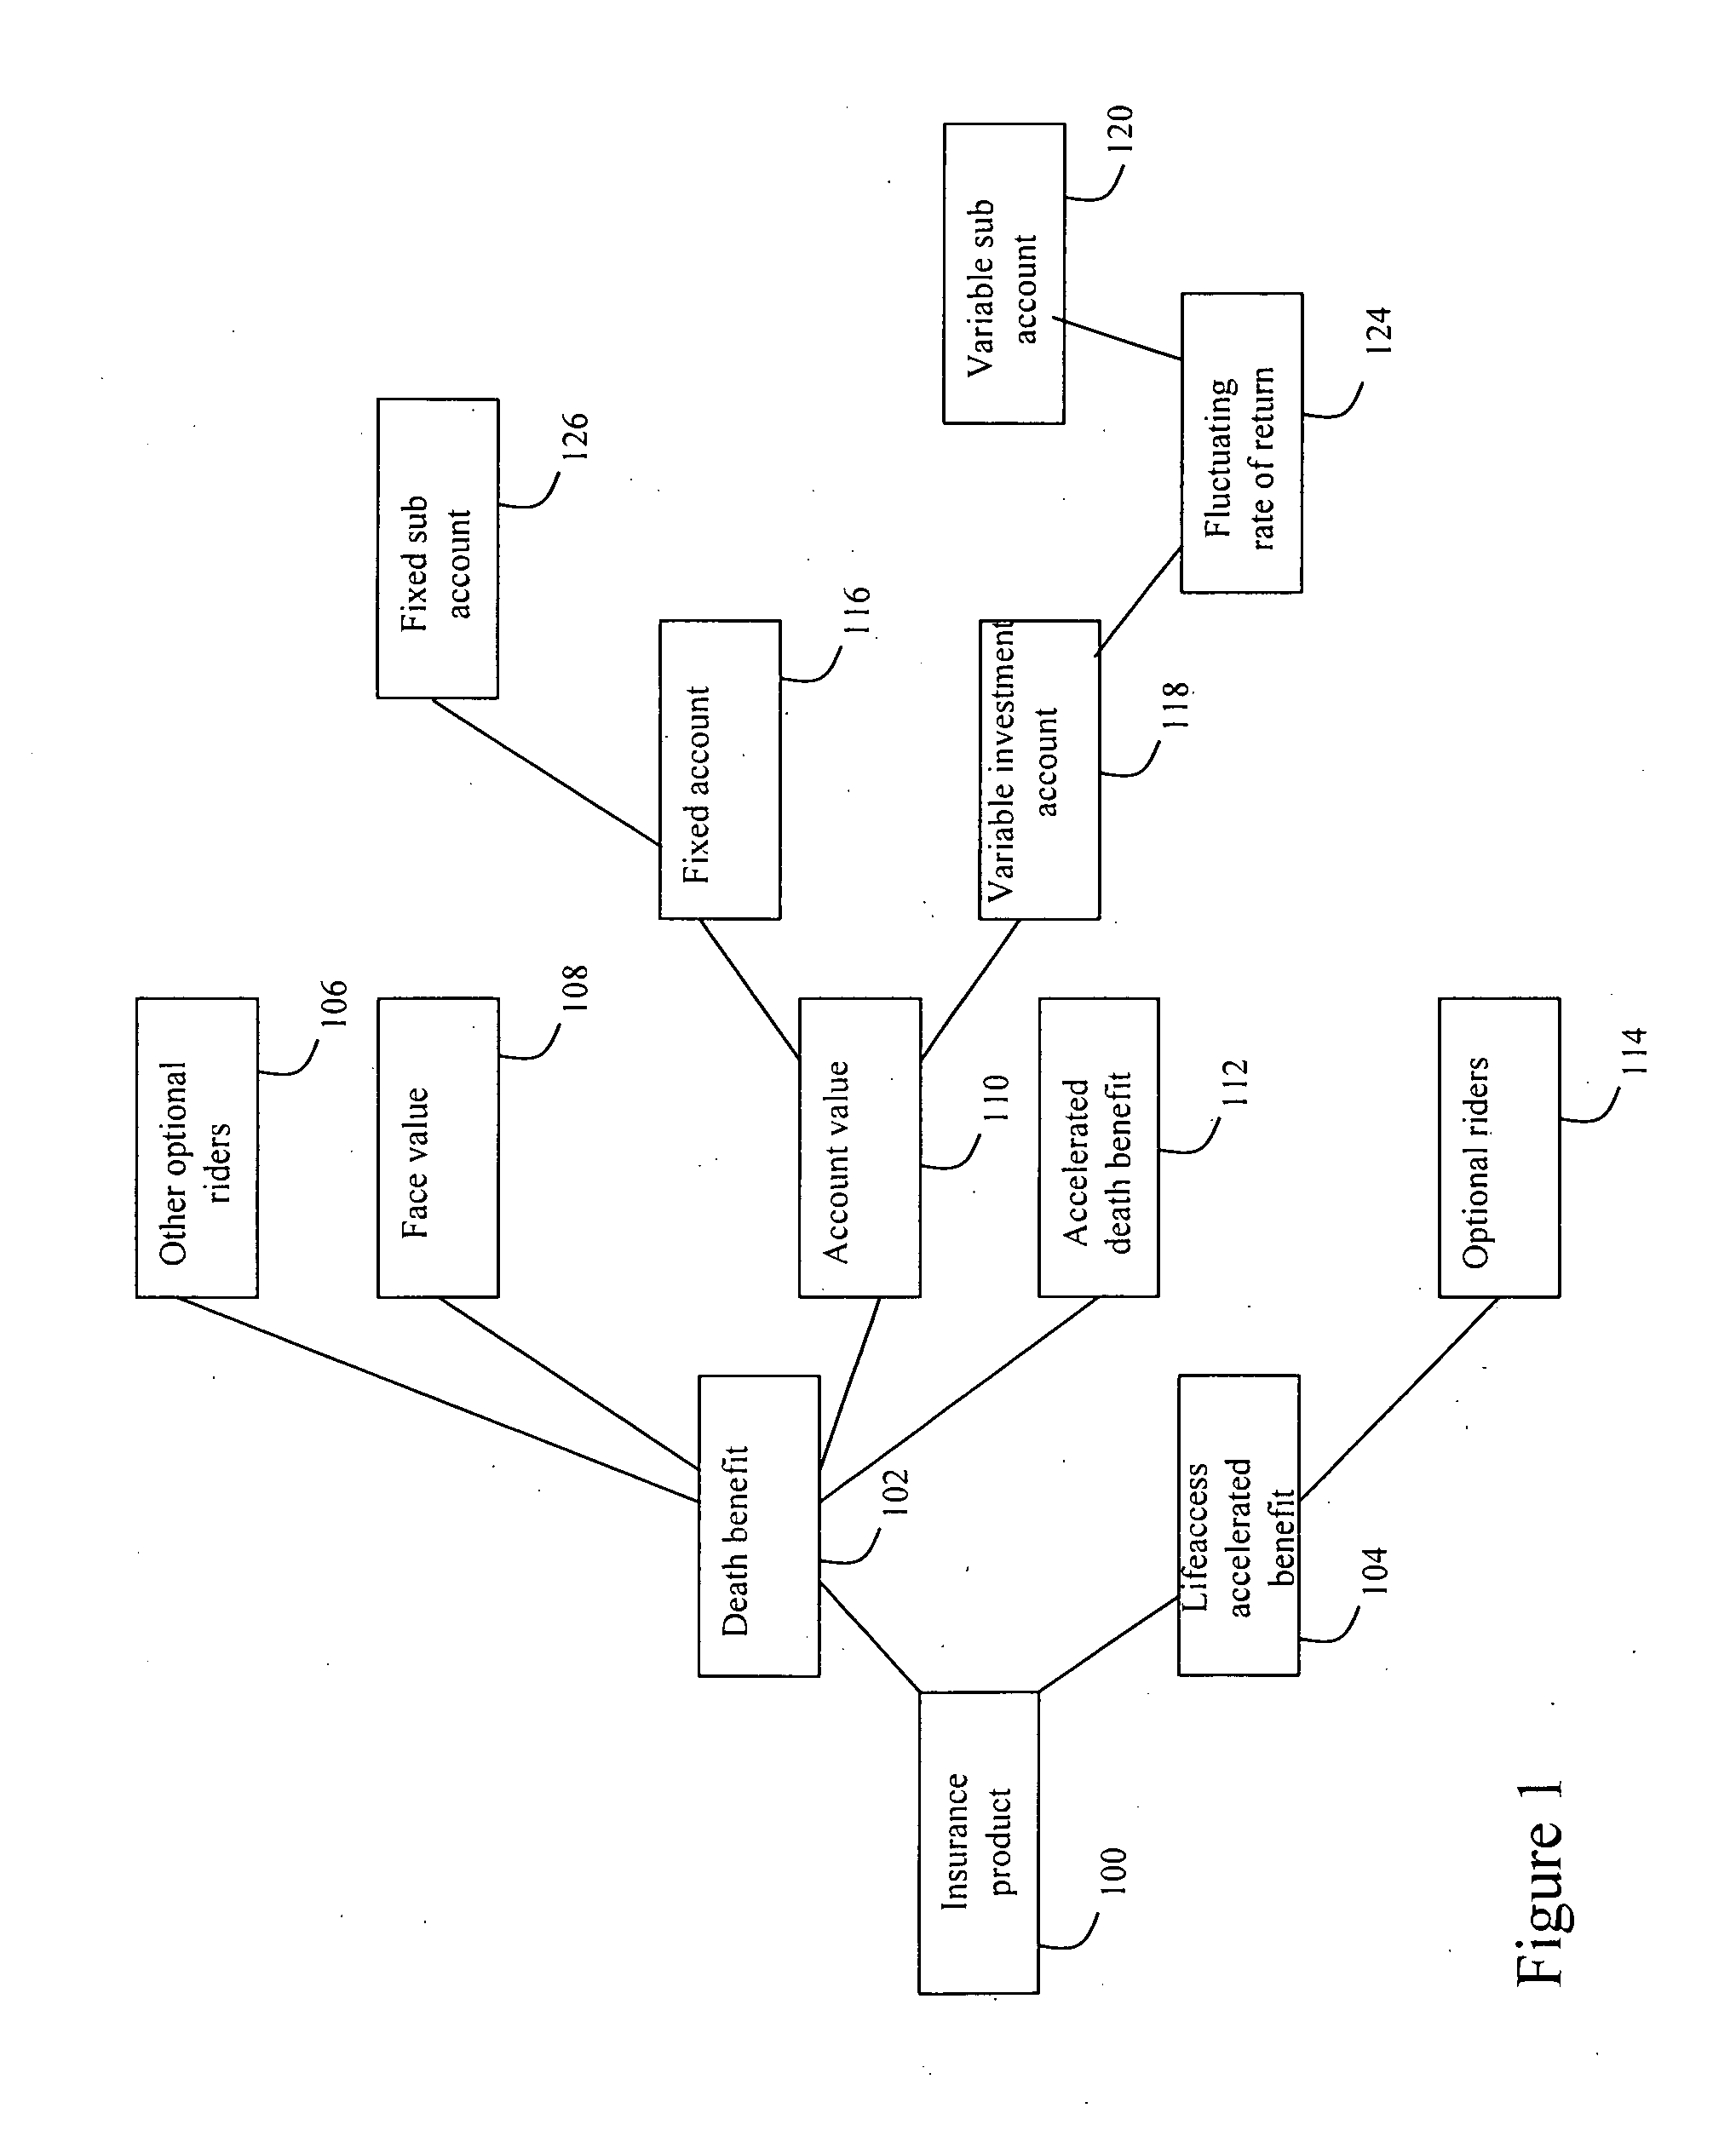 Accelerated benefit insurance product management and distribution system and method